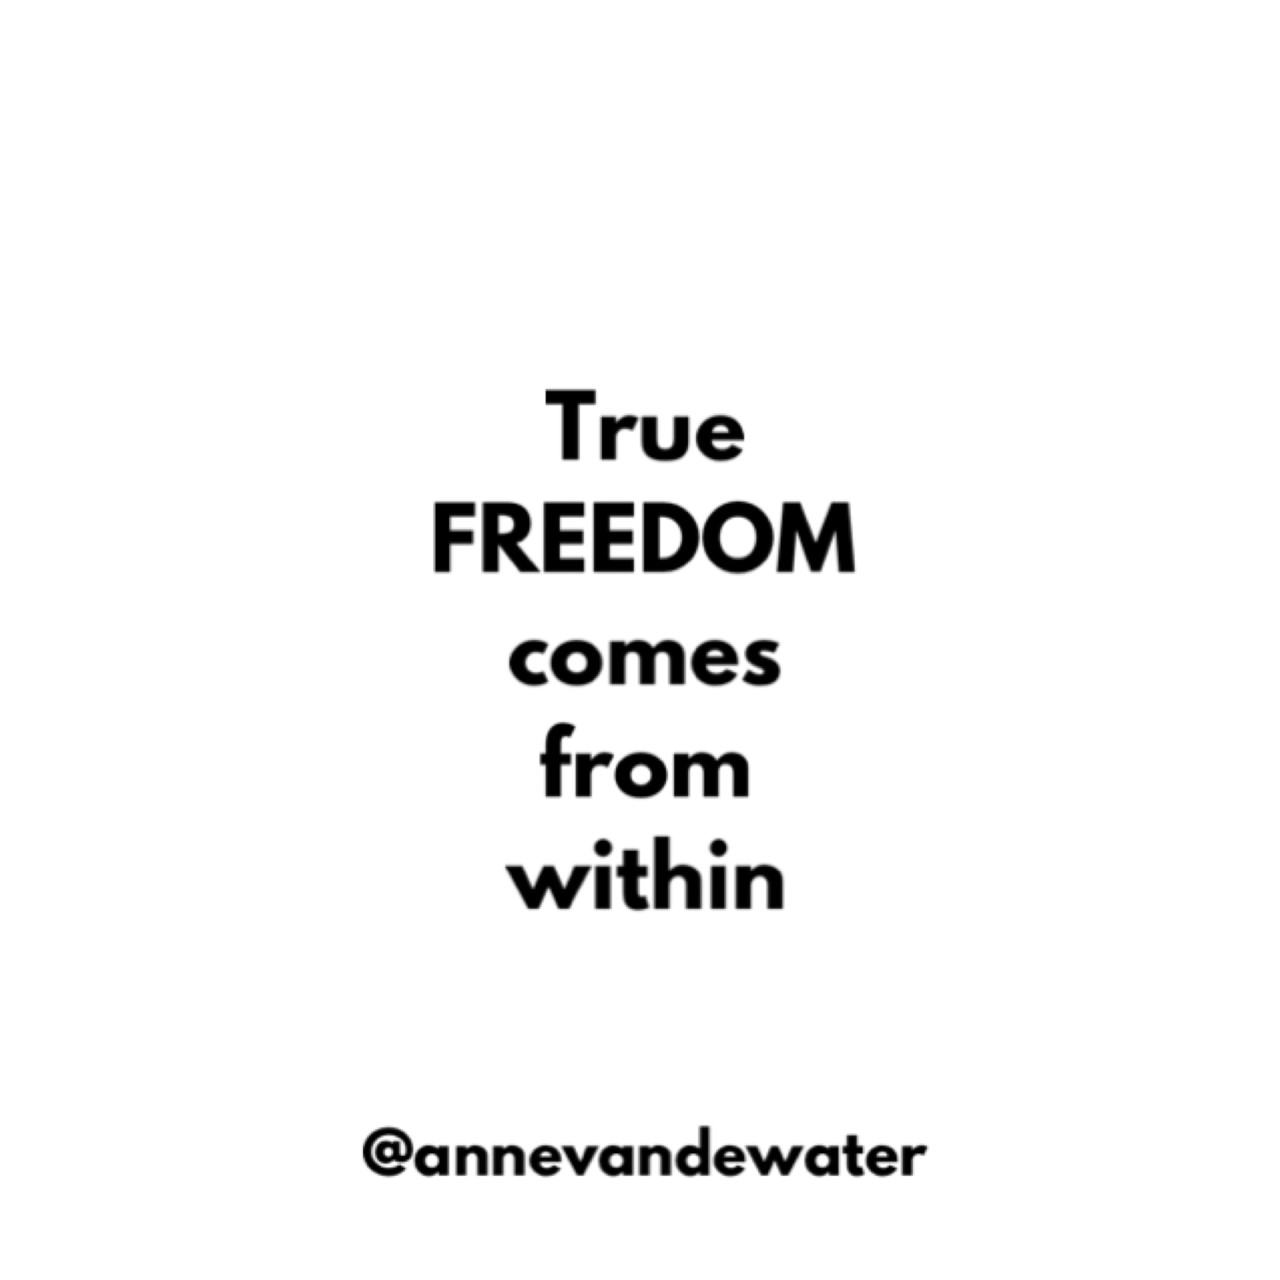 TRUE FREEDOM COMES FROM WITHIN